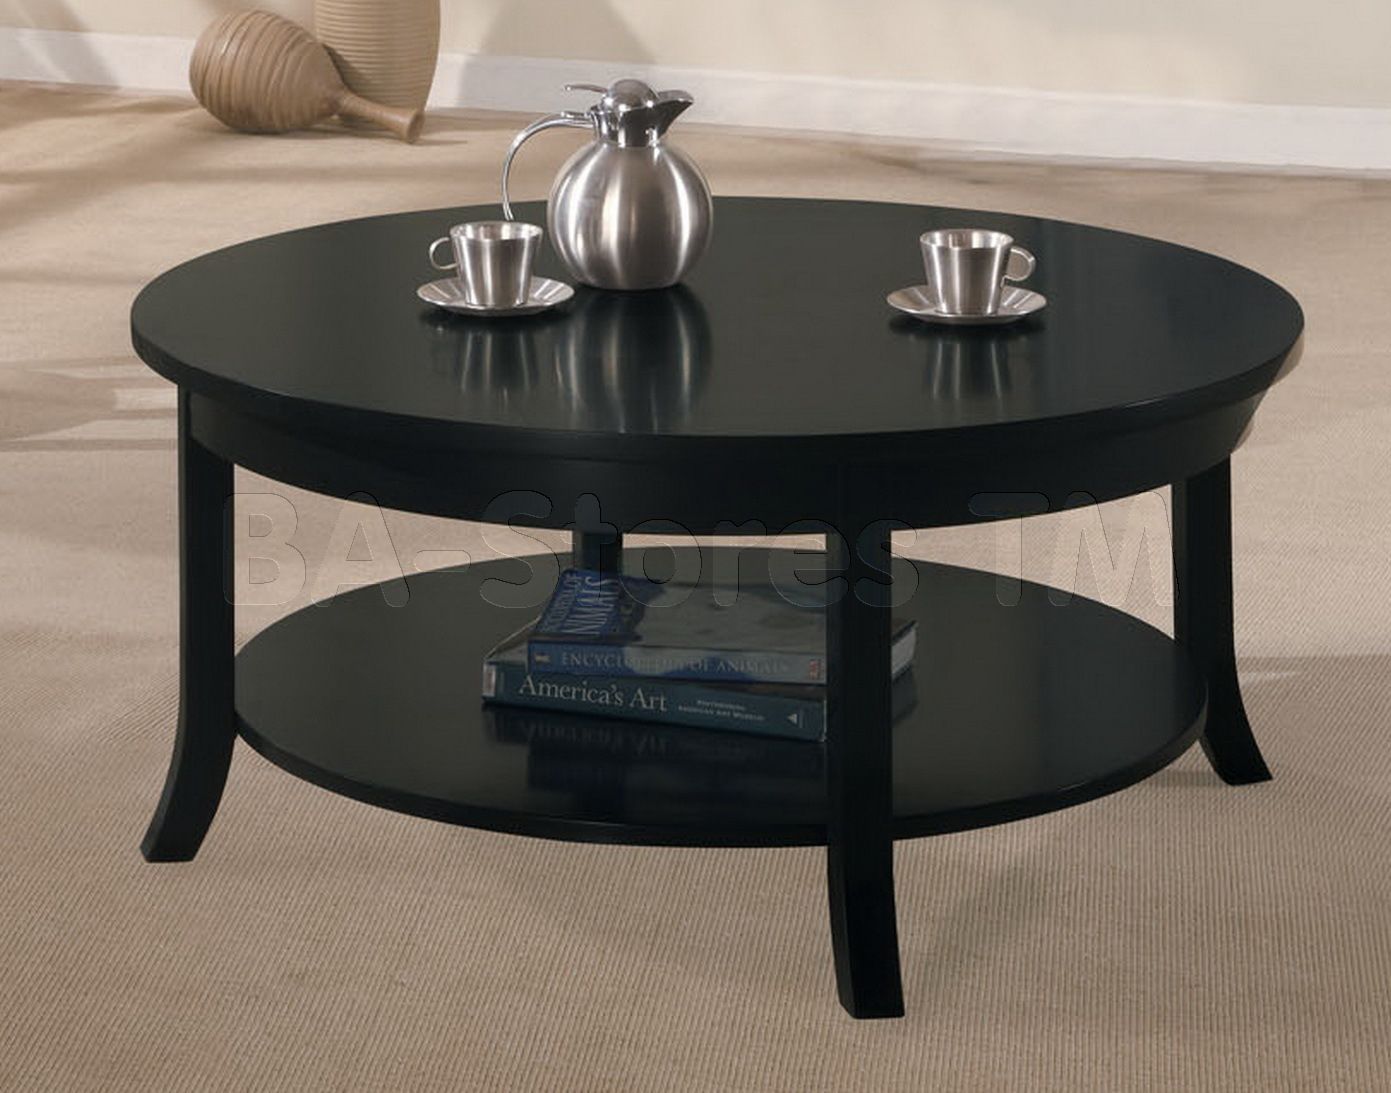 Bring A Touch Of Elegance To Your Home With A Black Circle Coffee Table Inside Full Black Round Coffee Tables (Gallery 5 of 20)